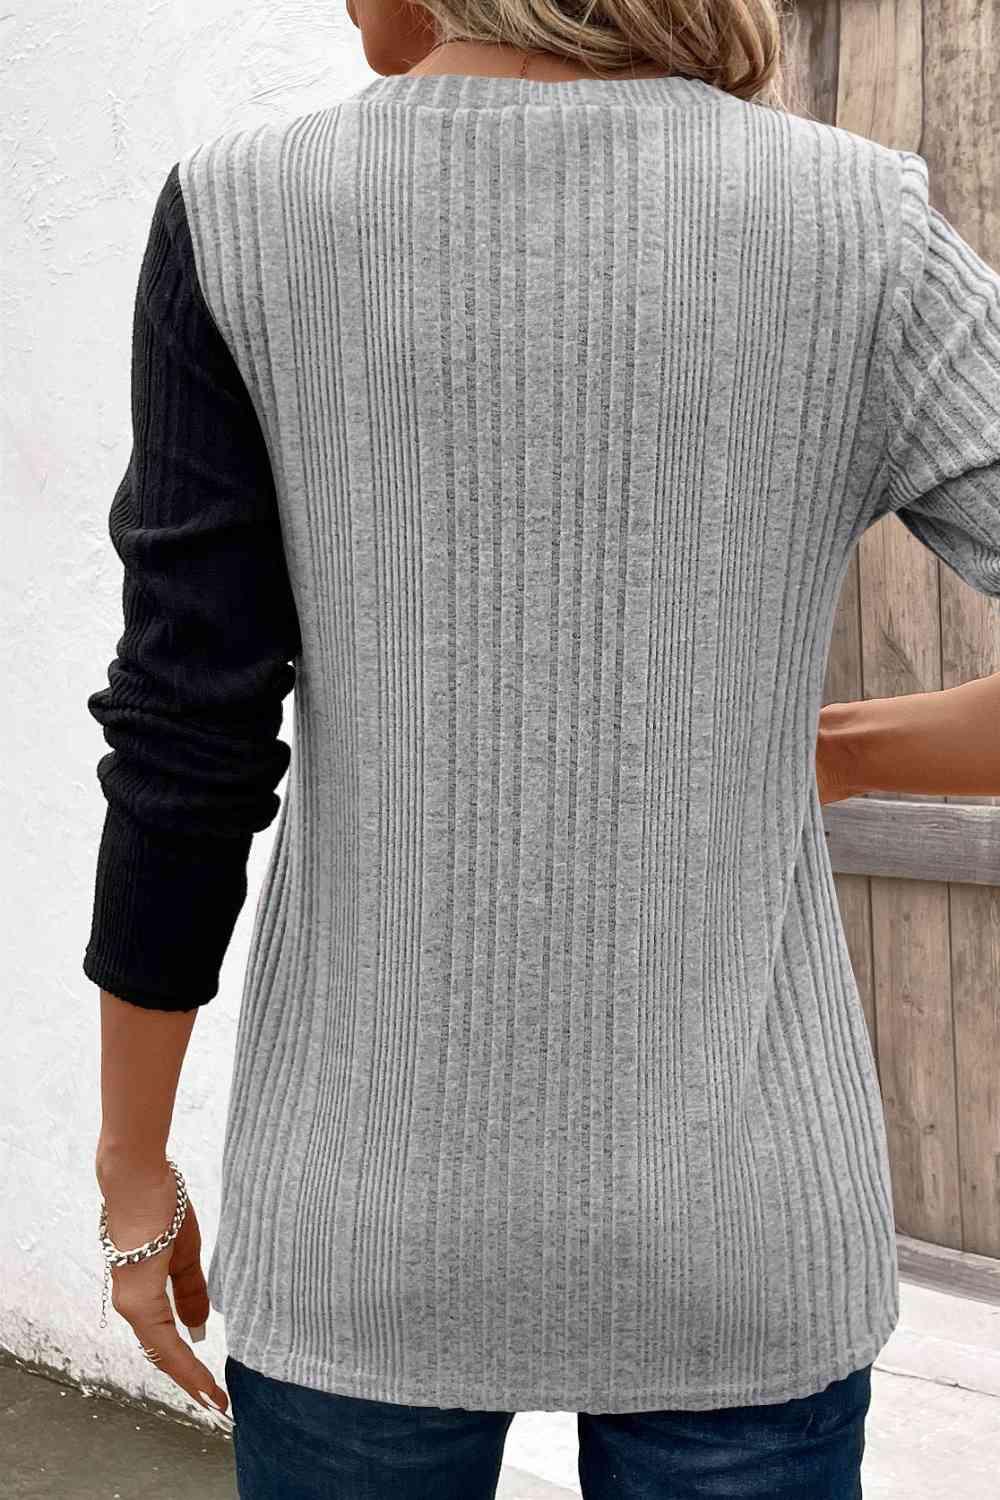 a woman wearing a gray sweater and jeans